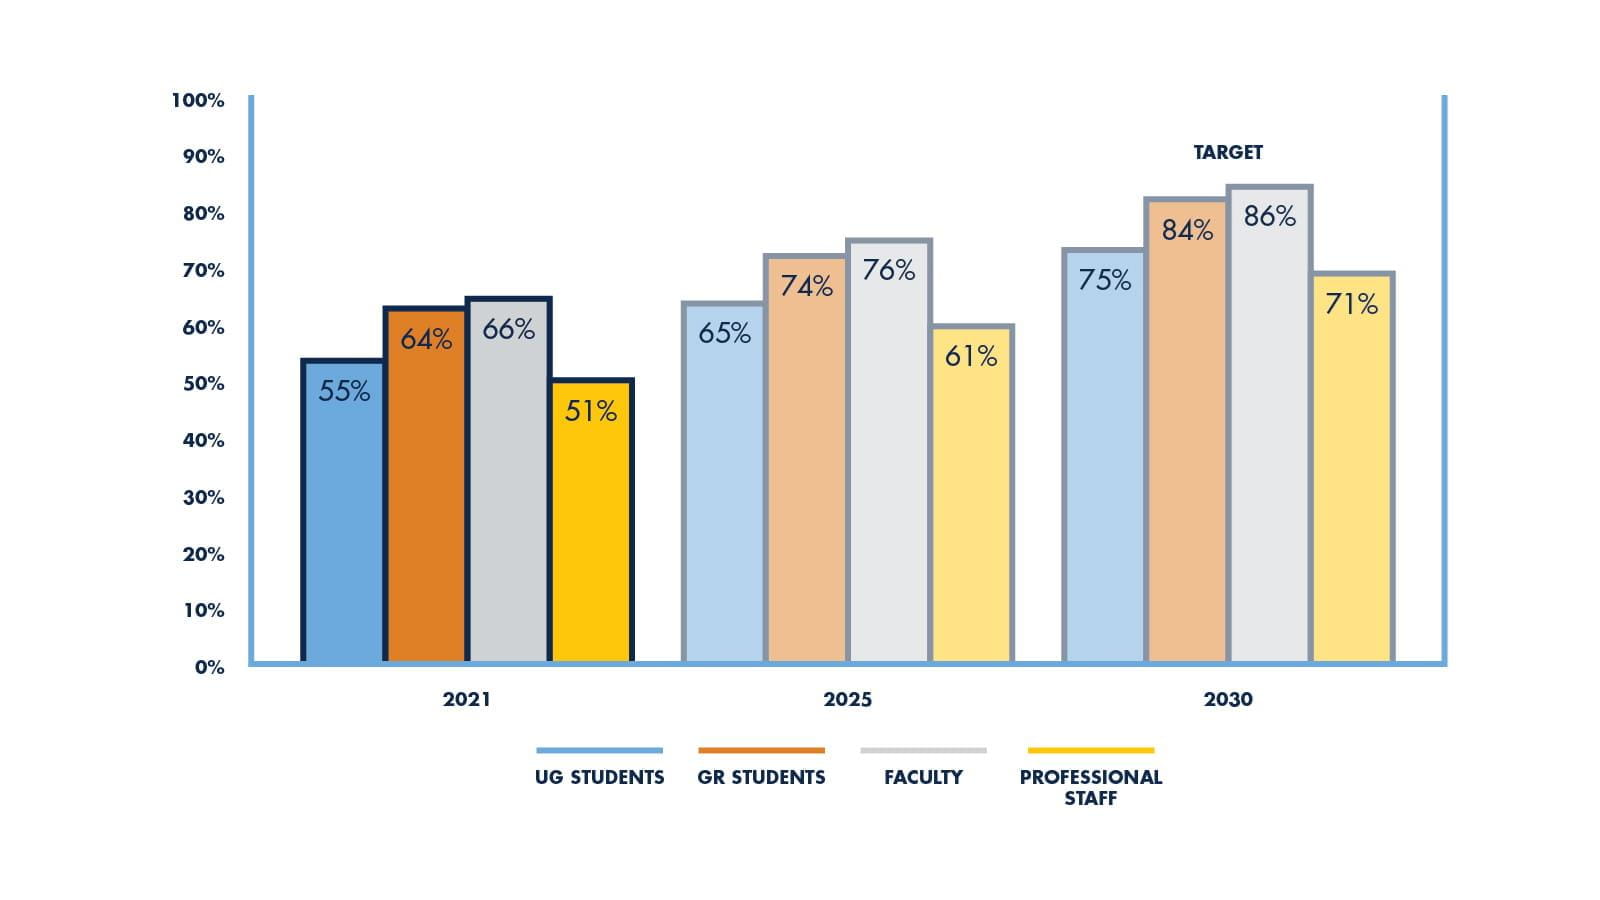 Bar graph showing reported sense of belonging in Drexel community members, showing that Drexel&#39;s goal is to achieve an approximately 20% increase in reported sense of belonging for all groups by 2030.